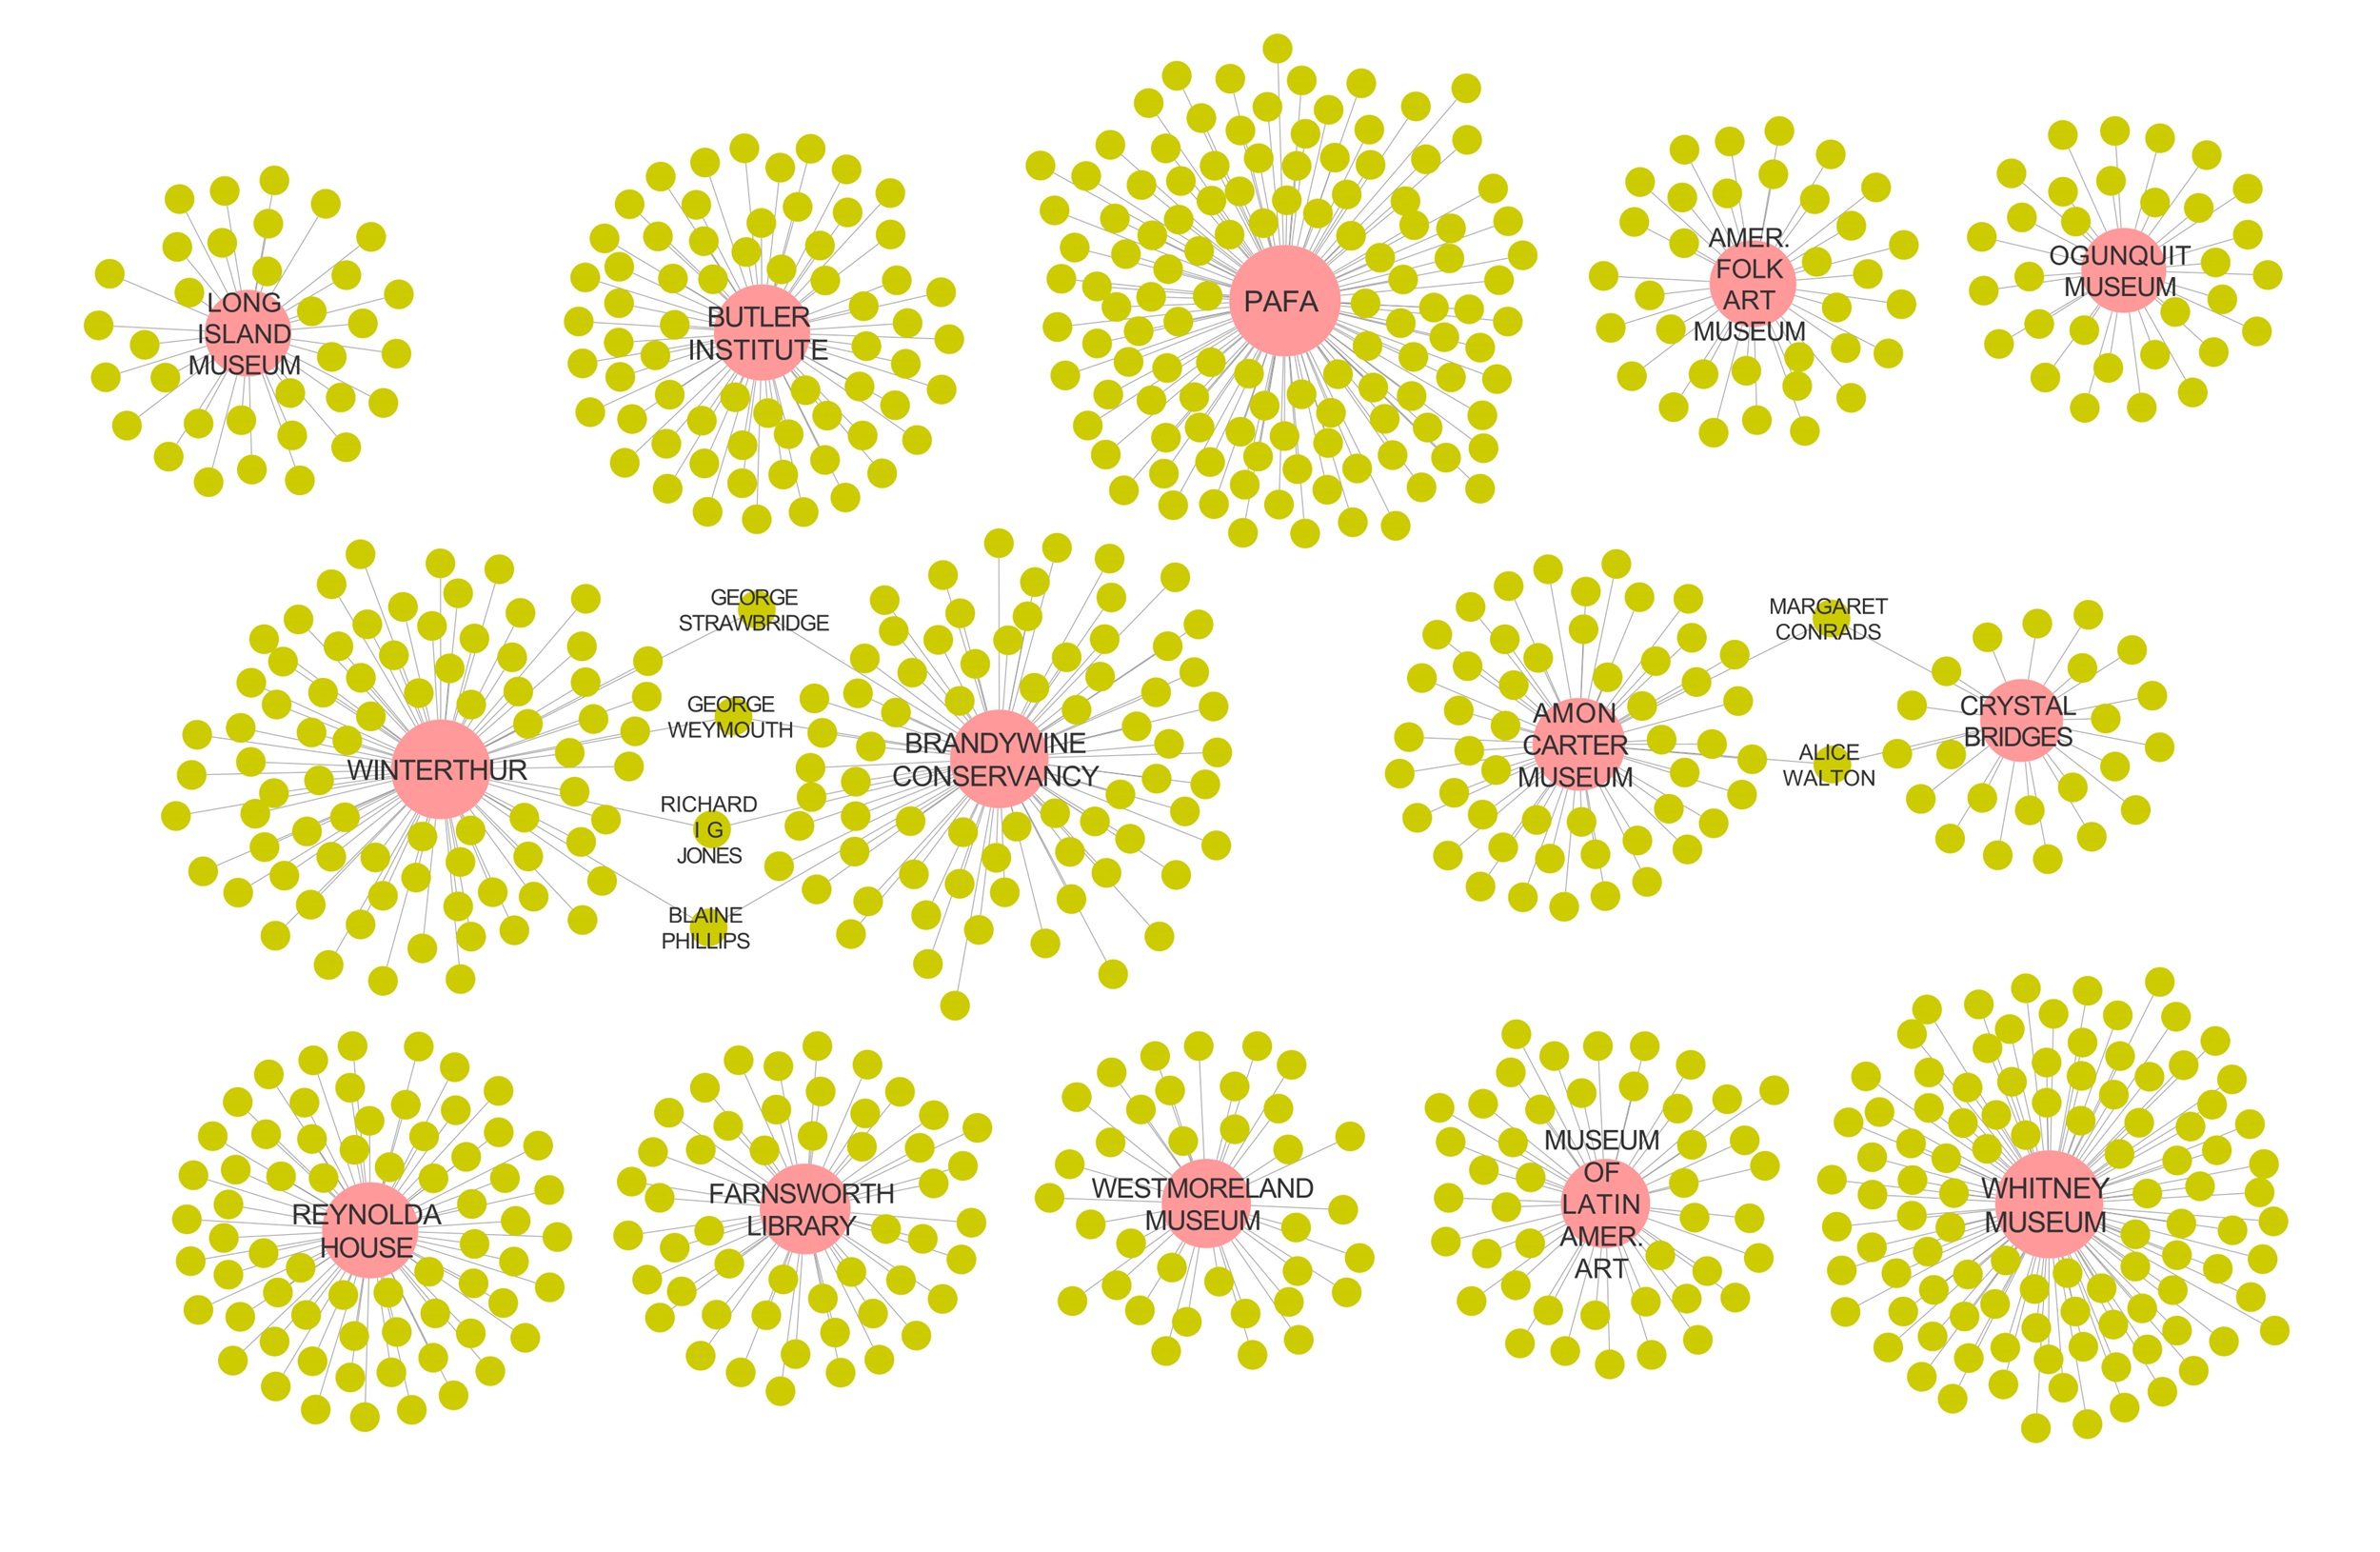 Network map showing yellow-green circles representing trustees clustered around salmon-pink circles labeled with the names of art museums